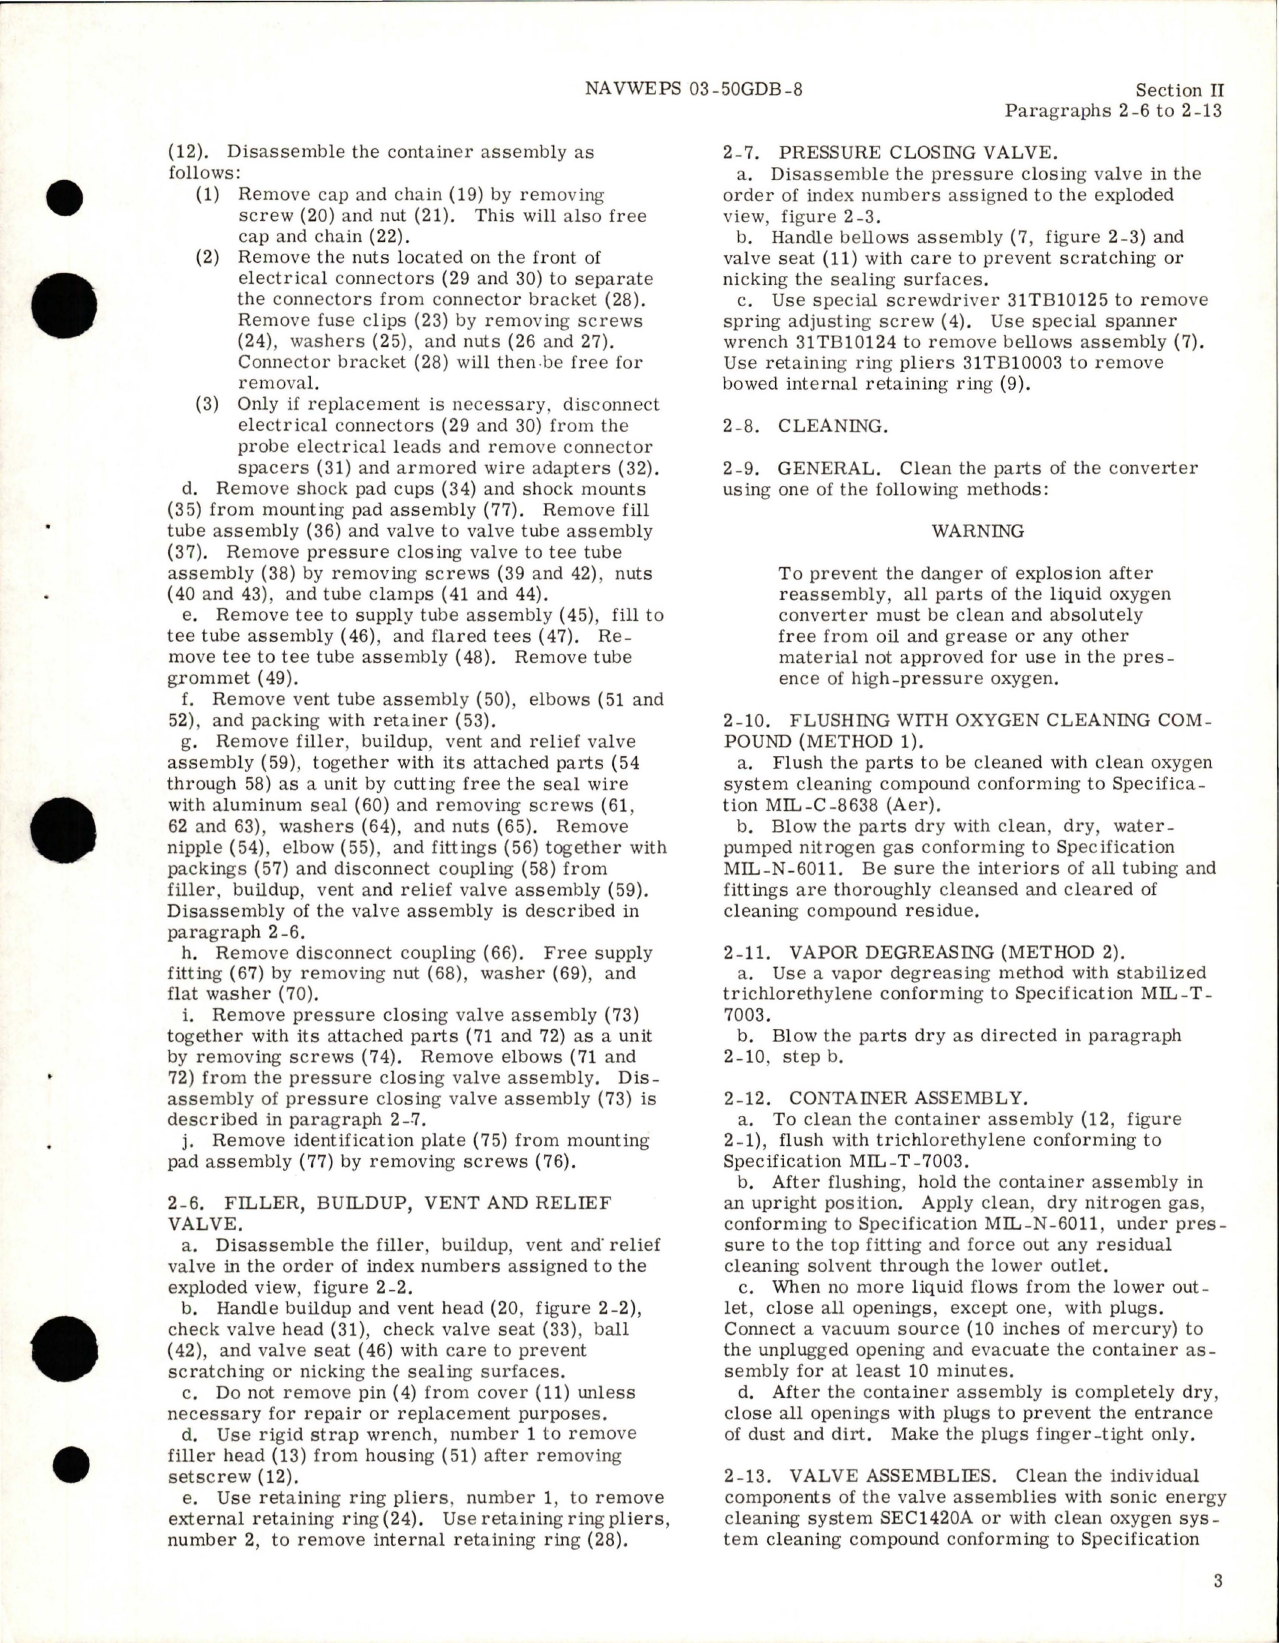 Sample page 7 from AirCorps Library document: Overhaul Instructions for Liquid Oxygen Converter - Part 29073-B1 and 29073-C1